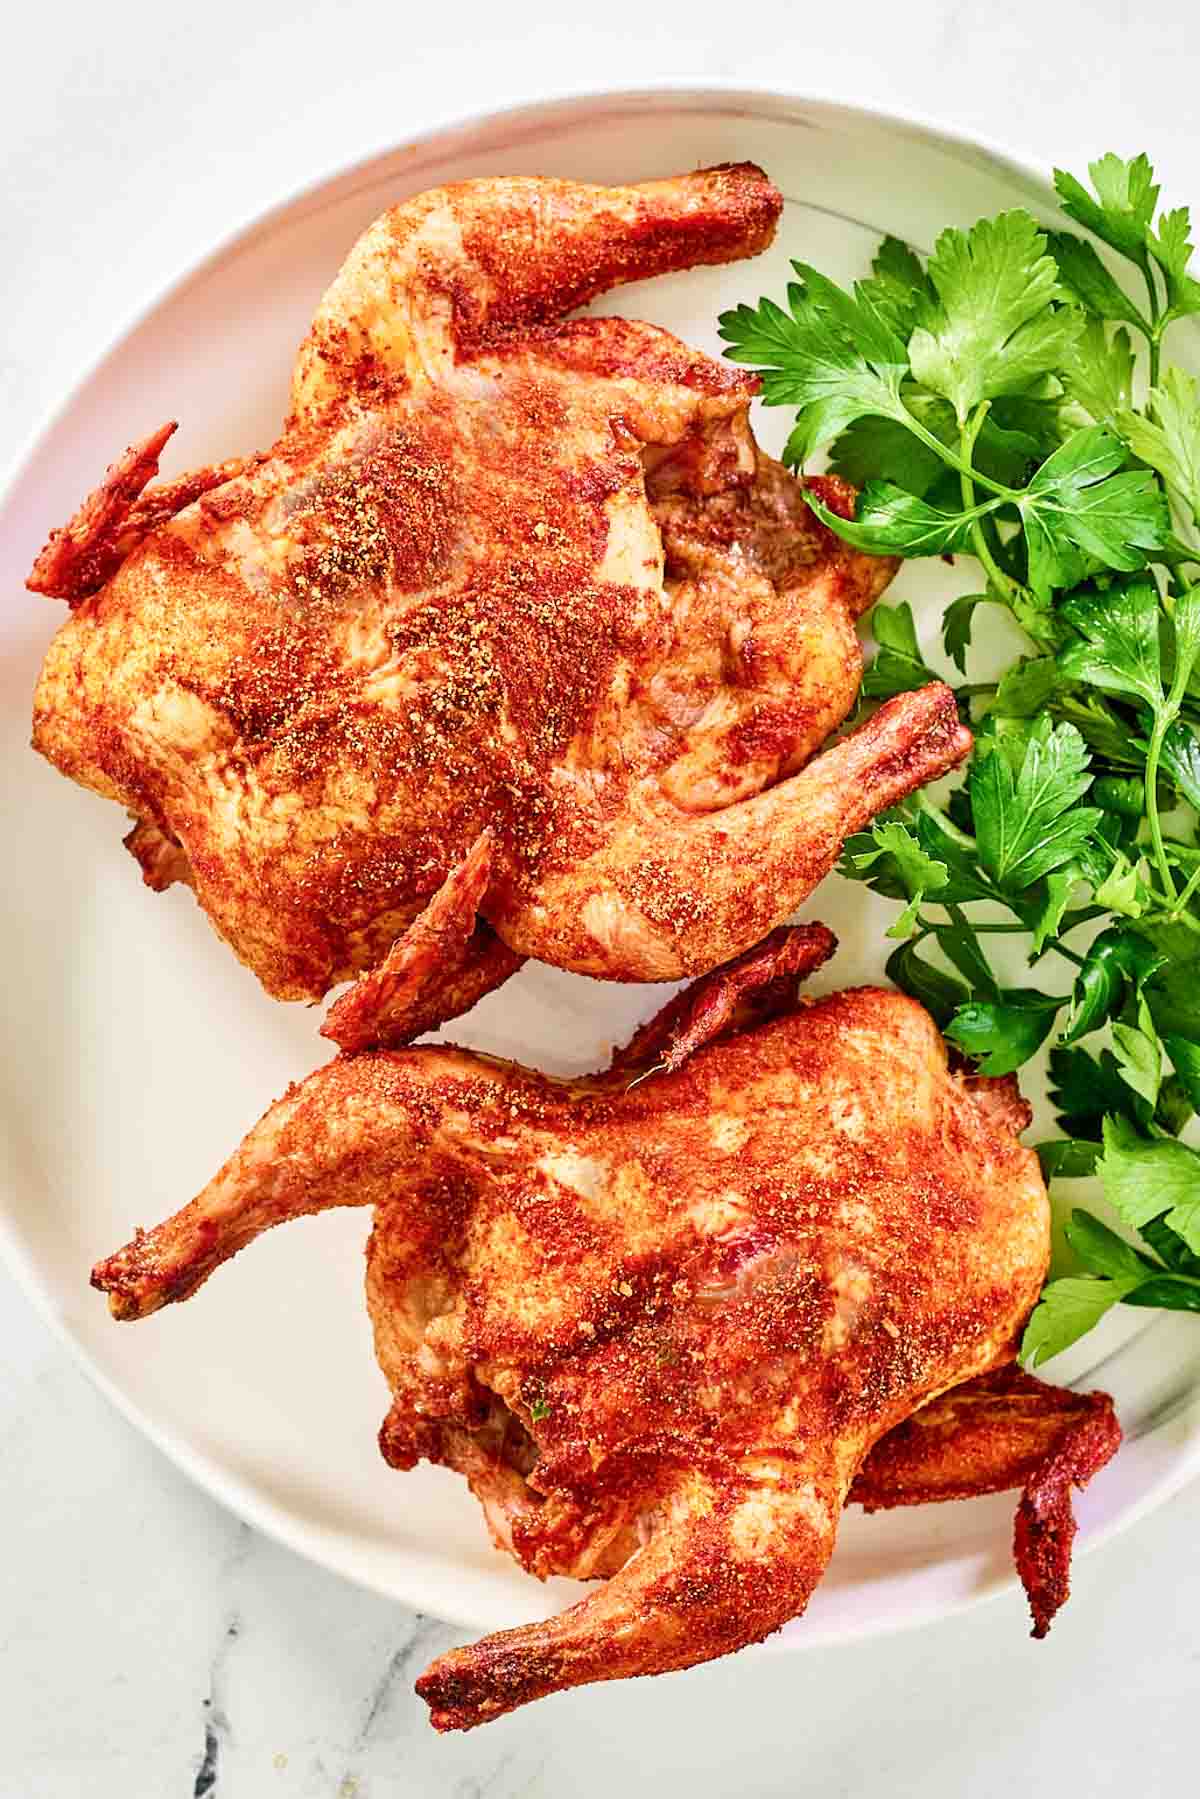 Two smoked cornish hens and parsley on a platter.